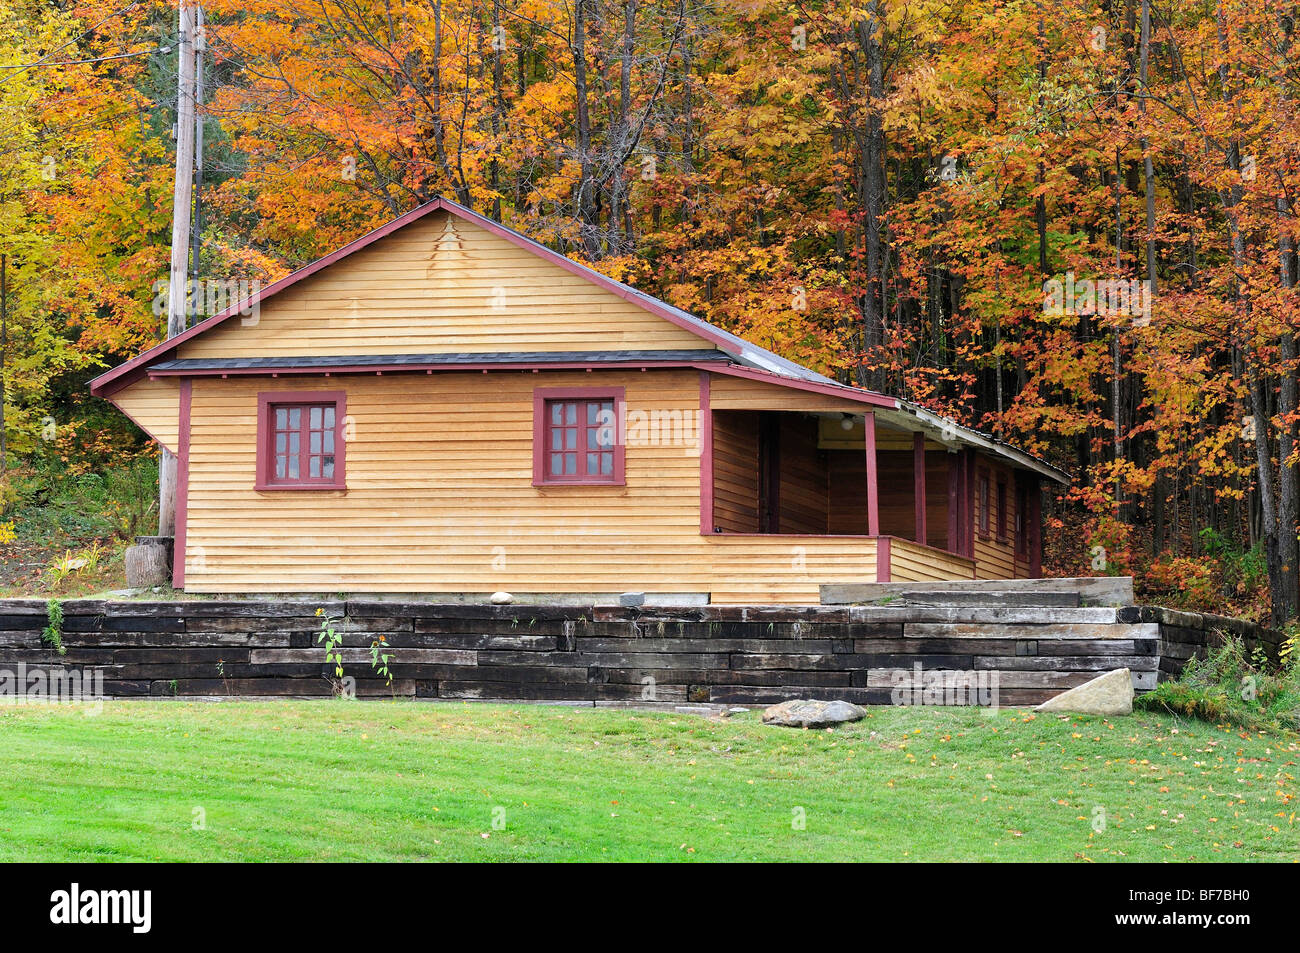 A rustic wood house sits among autumn foliage in Vermont, USA. Stock Photo